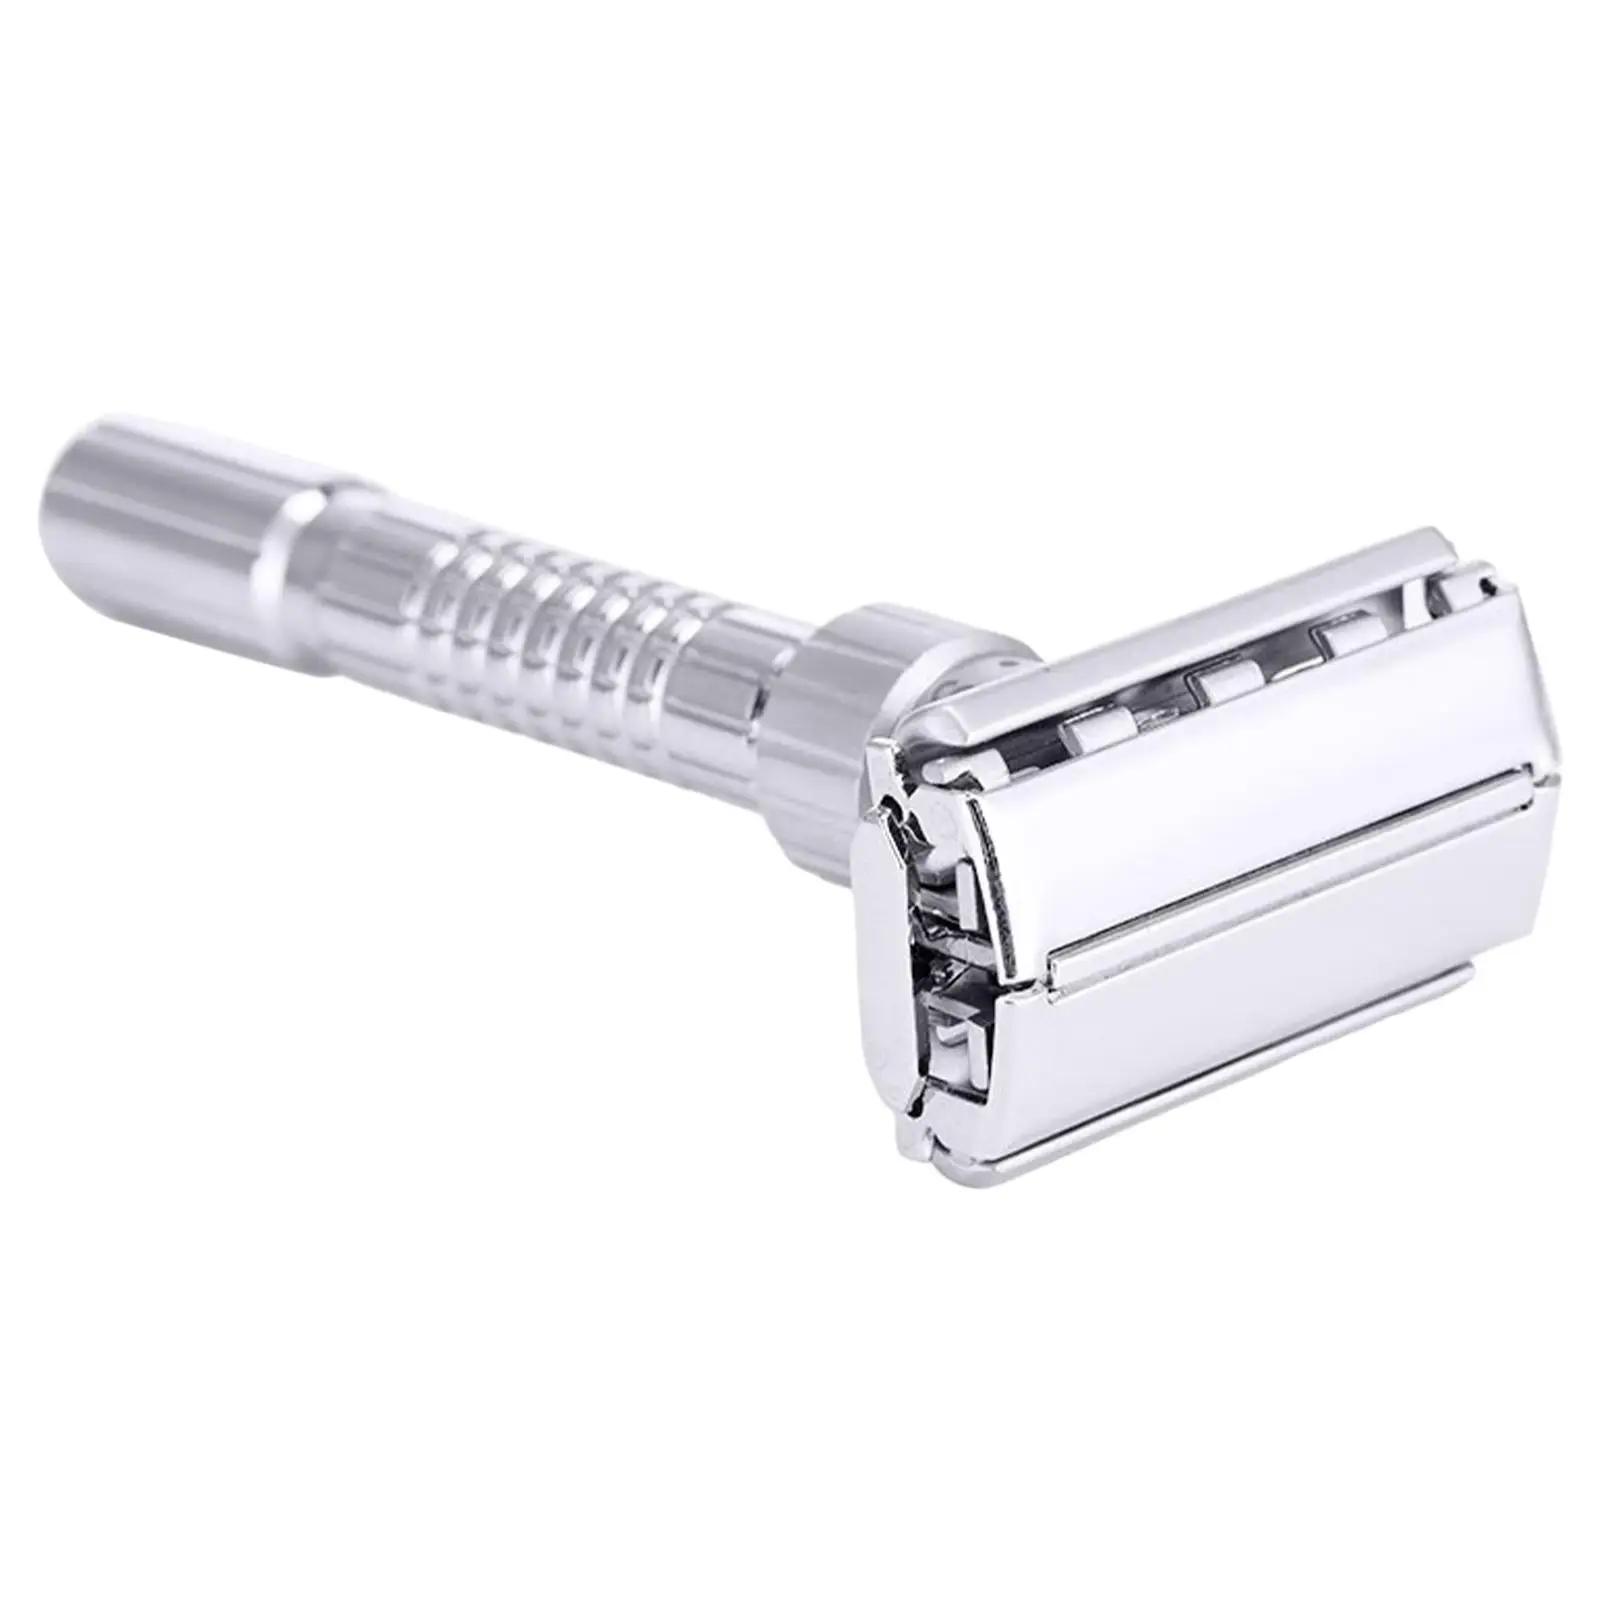 Manual Double Edge Safety Razor with 5 Blades Reusable Plated Eco Friendly Zinc Alloy Adjustable Beard Shaver for Everyday Use